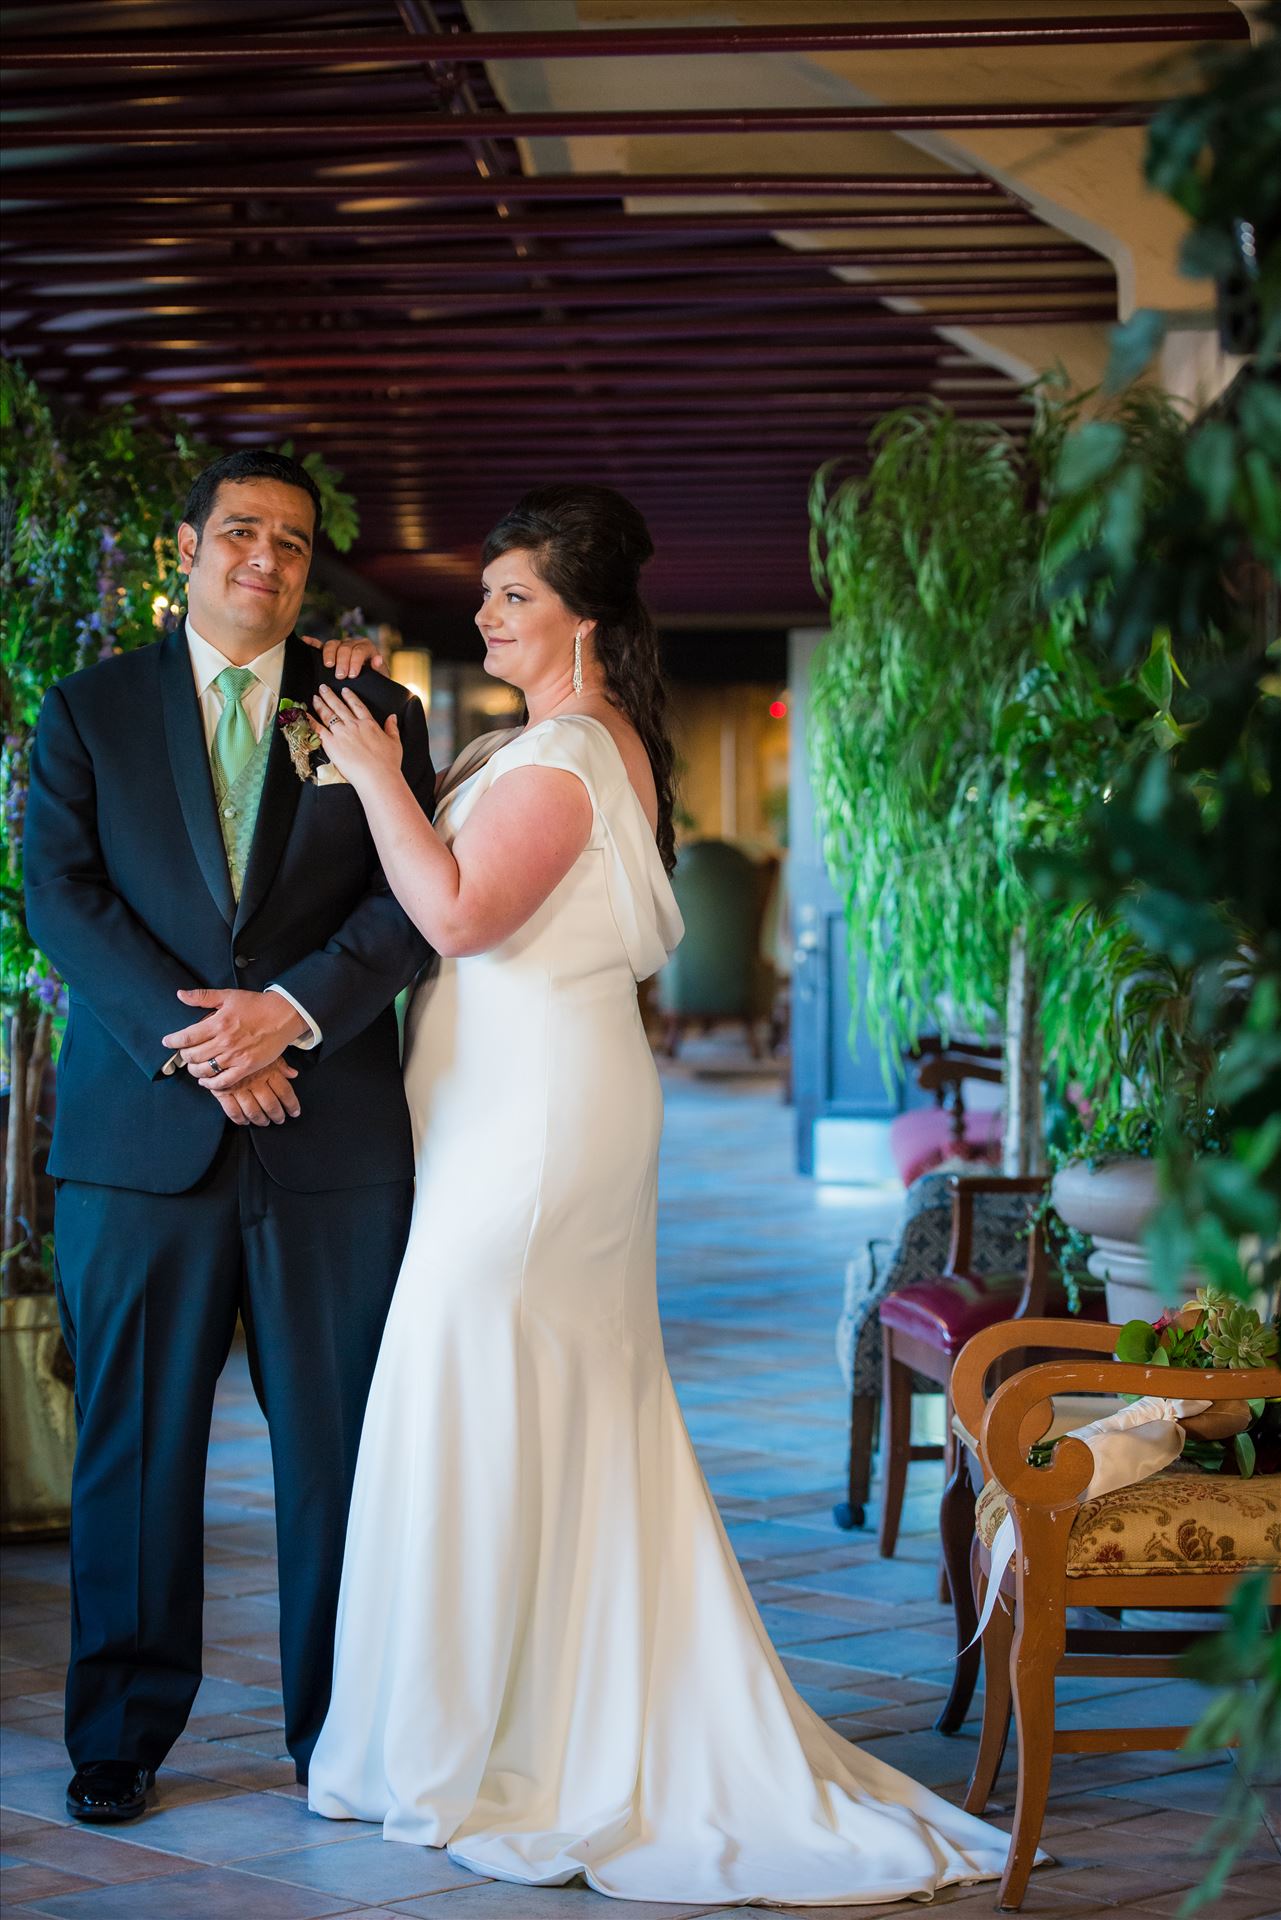 Mary and Alejandro 15 Wedding photography at the Historic Santa Maria Inn in Santa Maria, California by Mirror's Edge Photography. Bride and Groom in breezeway between the Taproom and the Front Desk at the Santa Maria Inn. by Sarah Williams